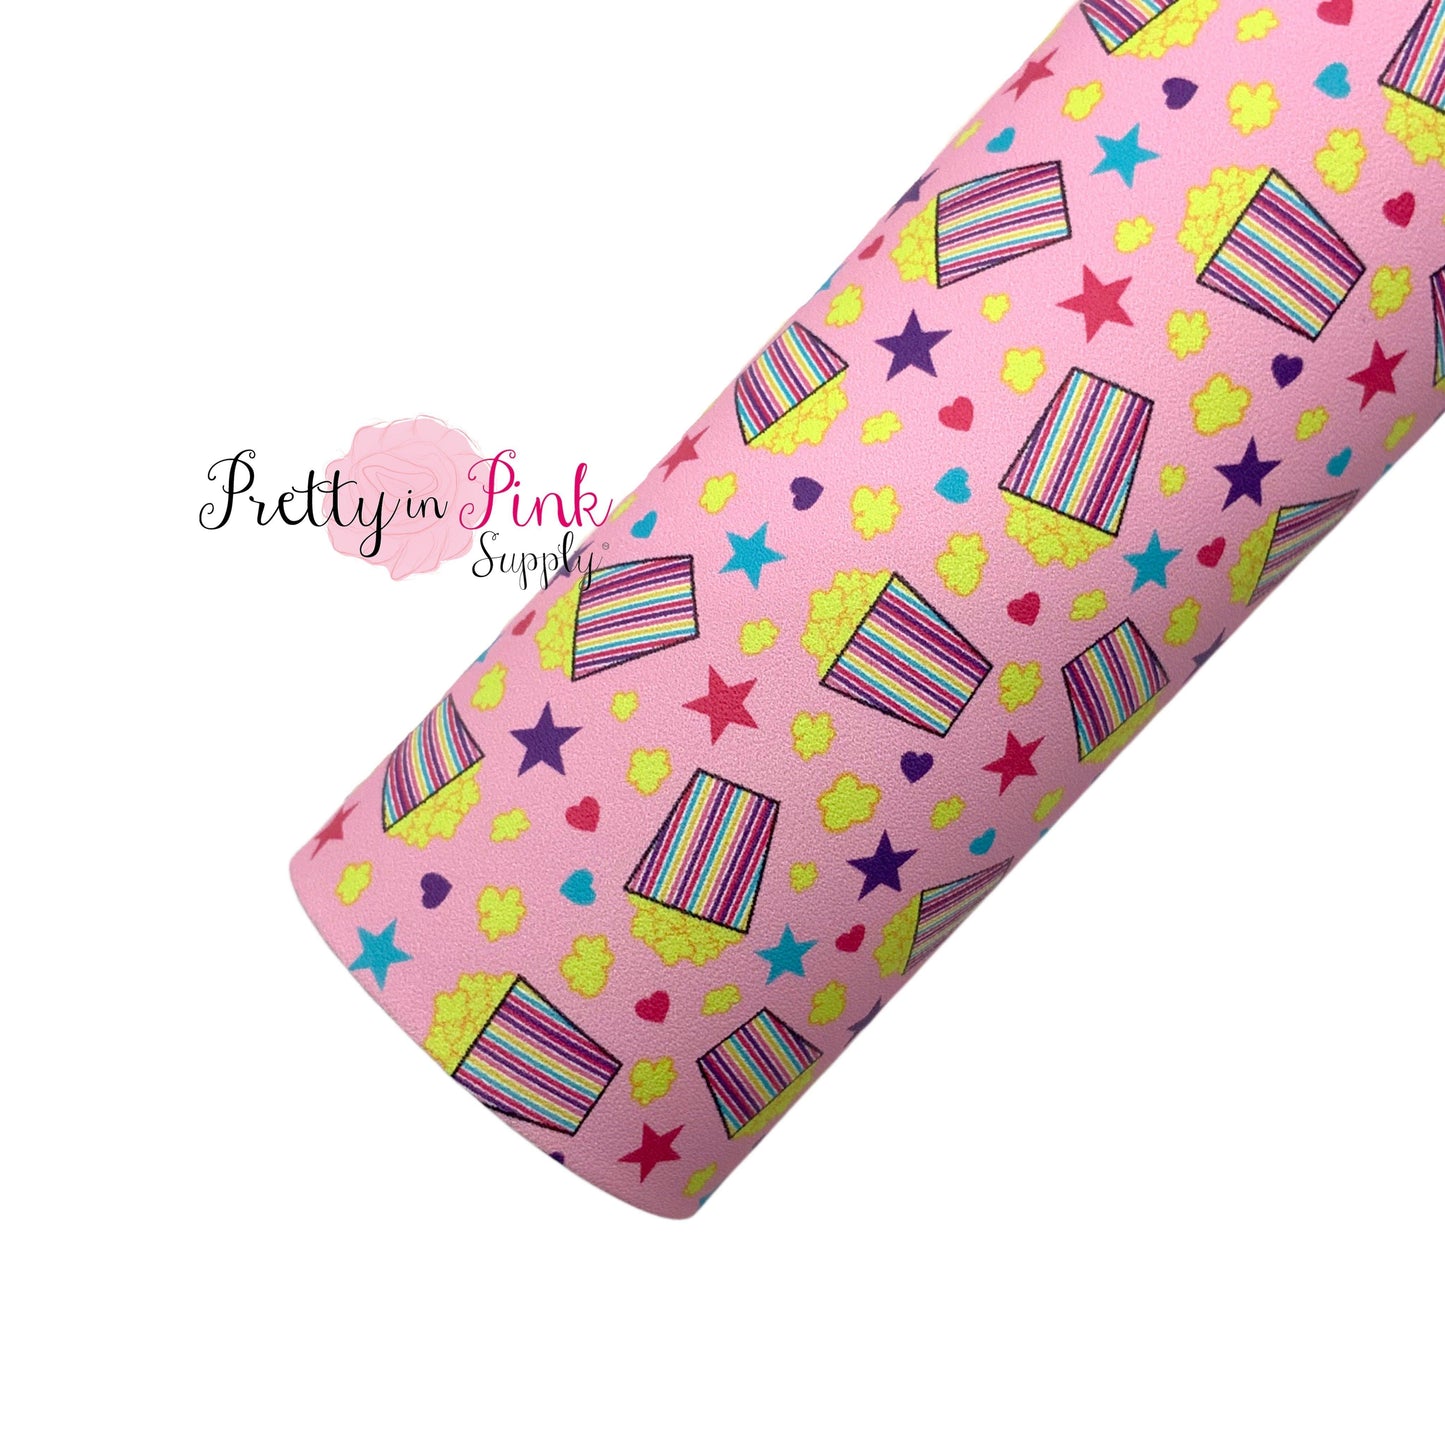 Rolled smooth faux leather with pattern of popcorn tubs with popcorn and stars and hearts on a light pink background.